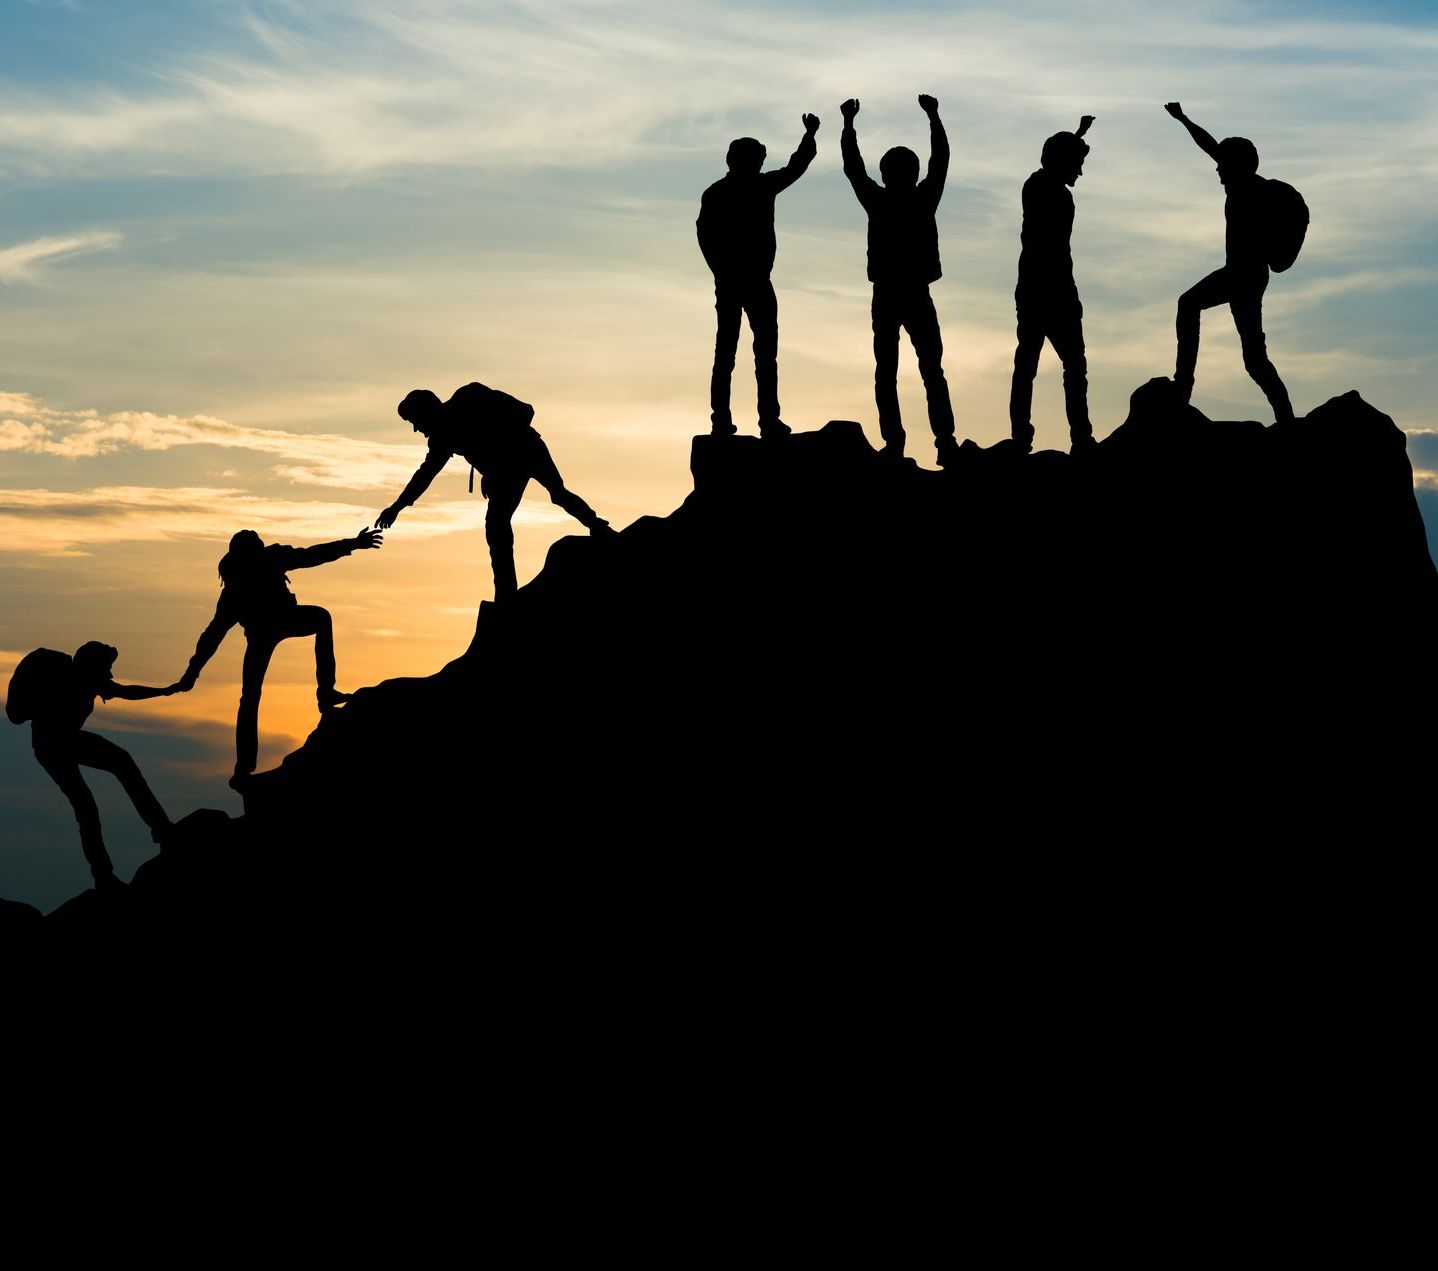 A silhouette of a team helping each other making it up a mountain while the sun sets in the background. The people at the top are celebrating.